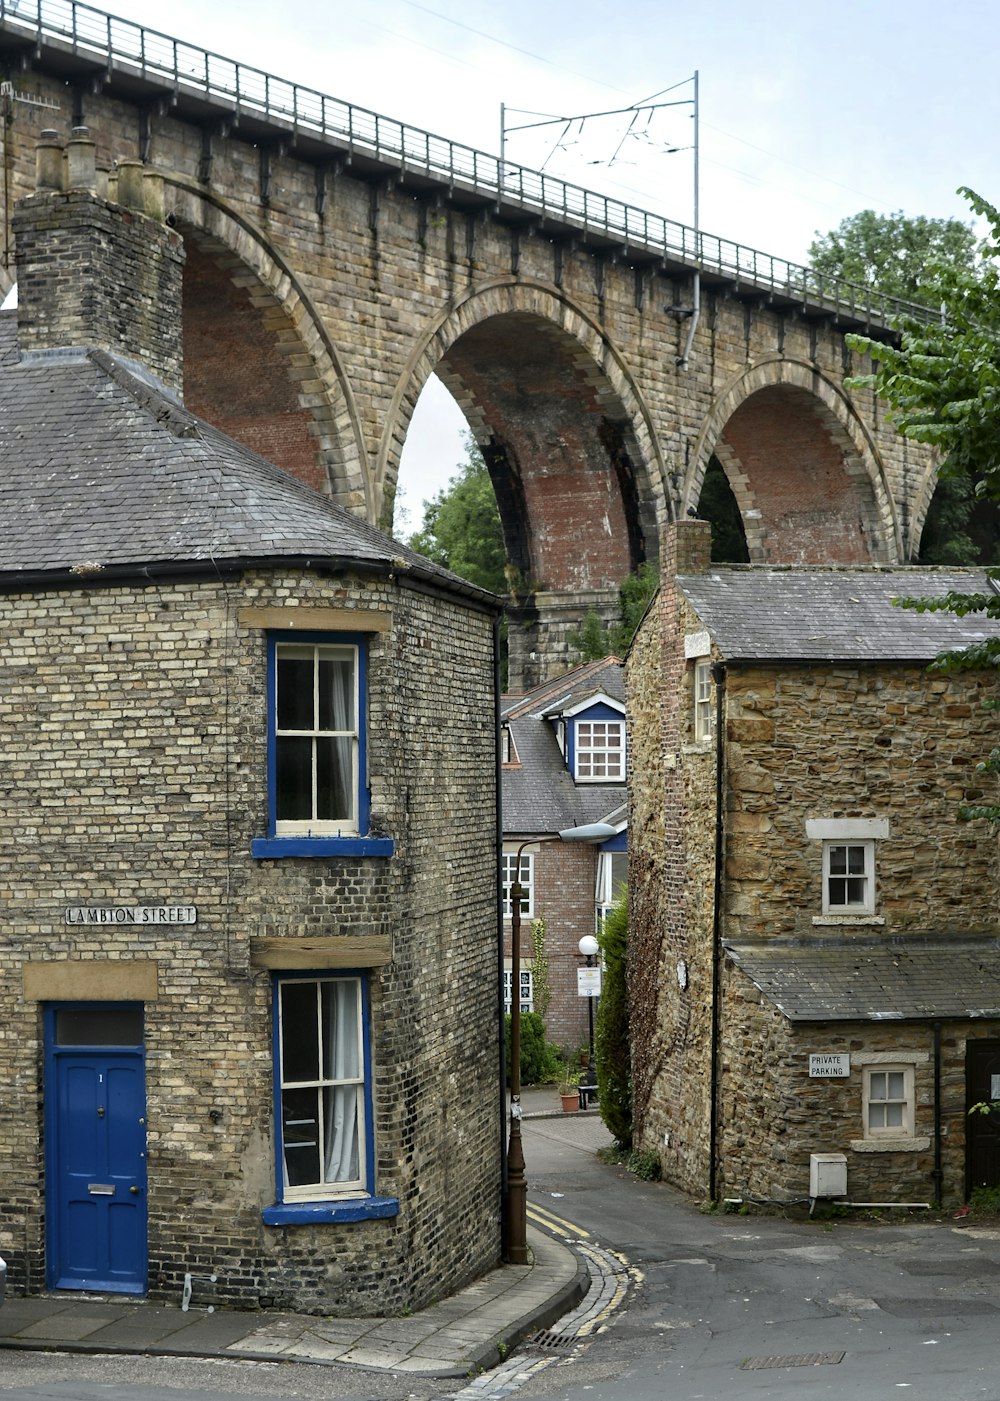 a brick building with a blue door and a bridge in the background